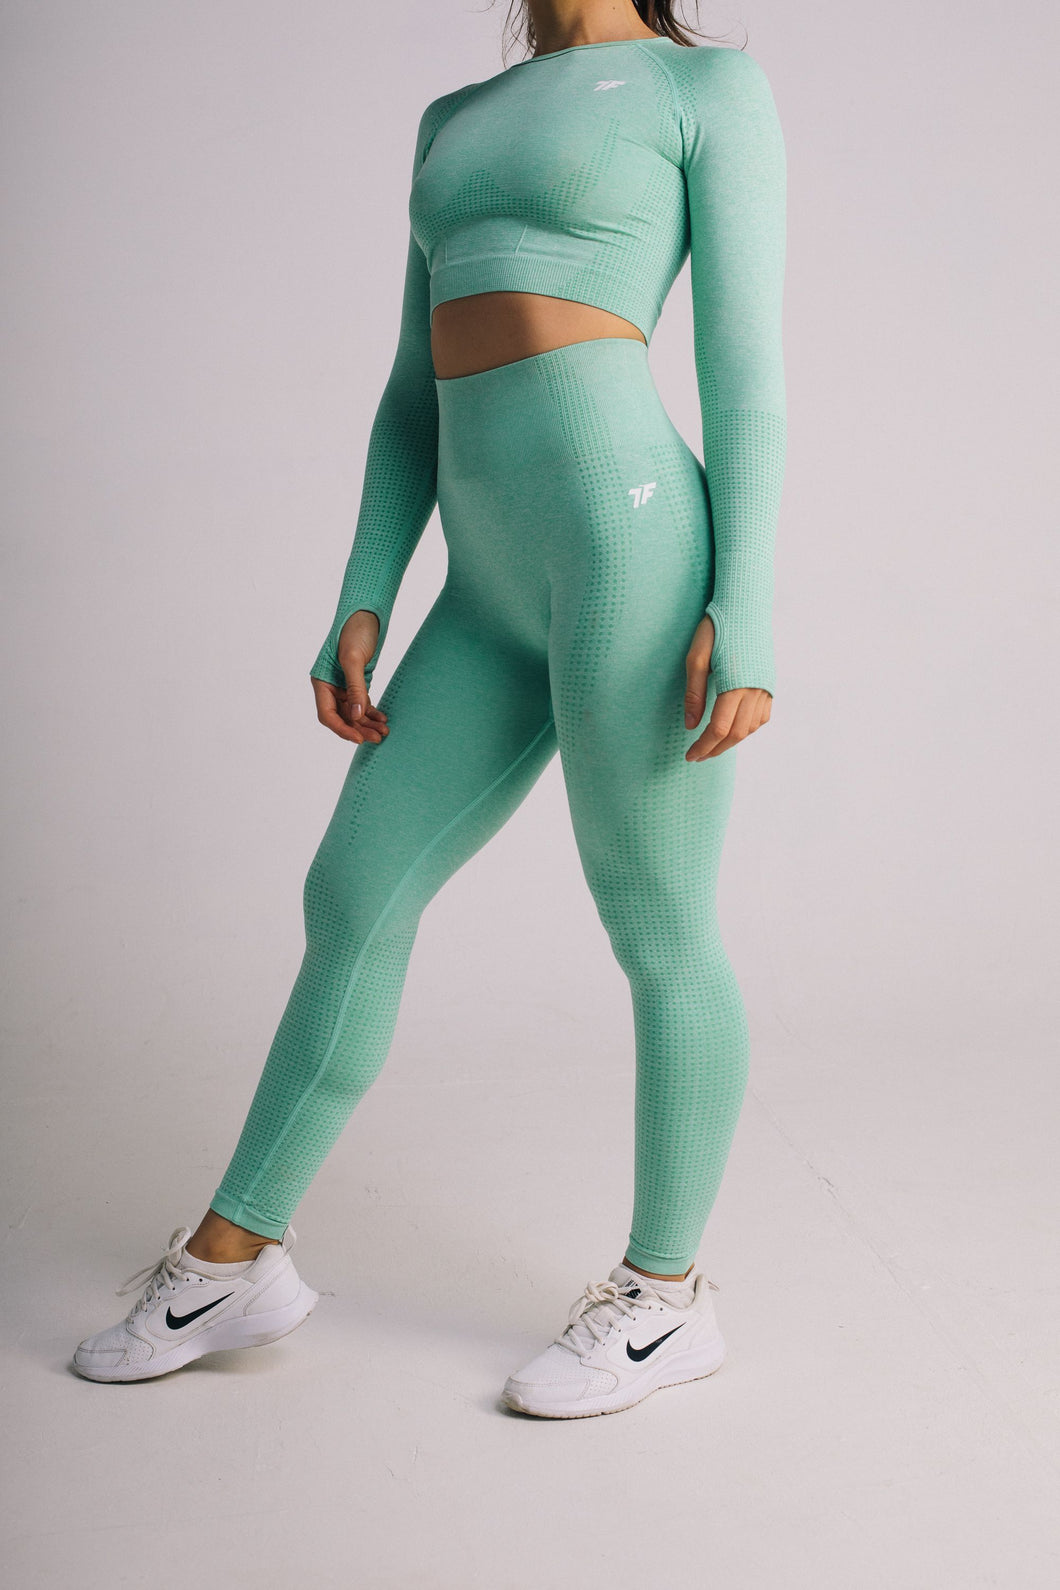 Courage Leggings - Peppermint